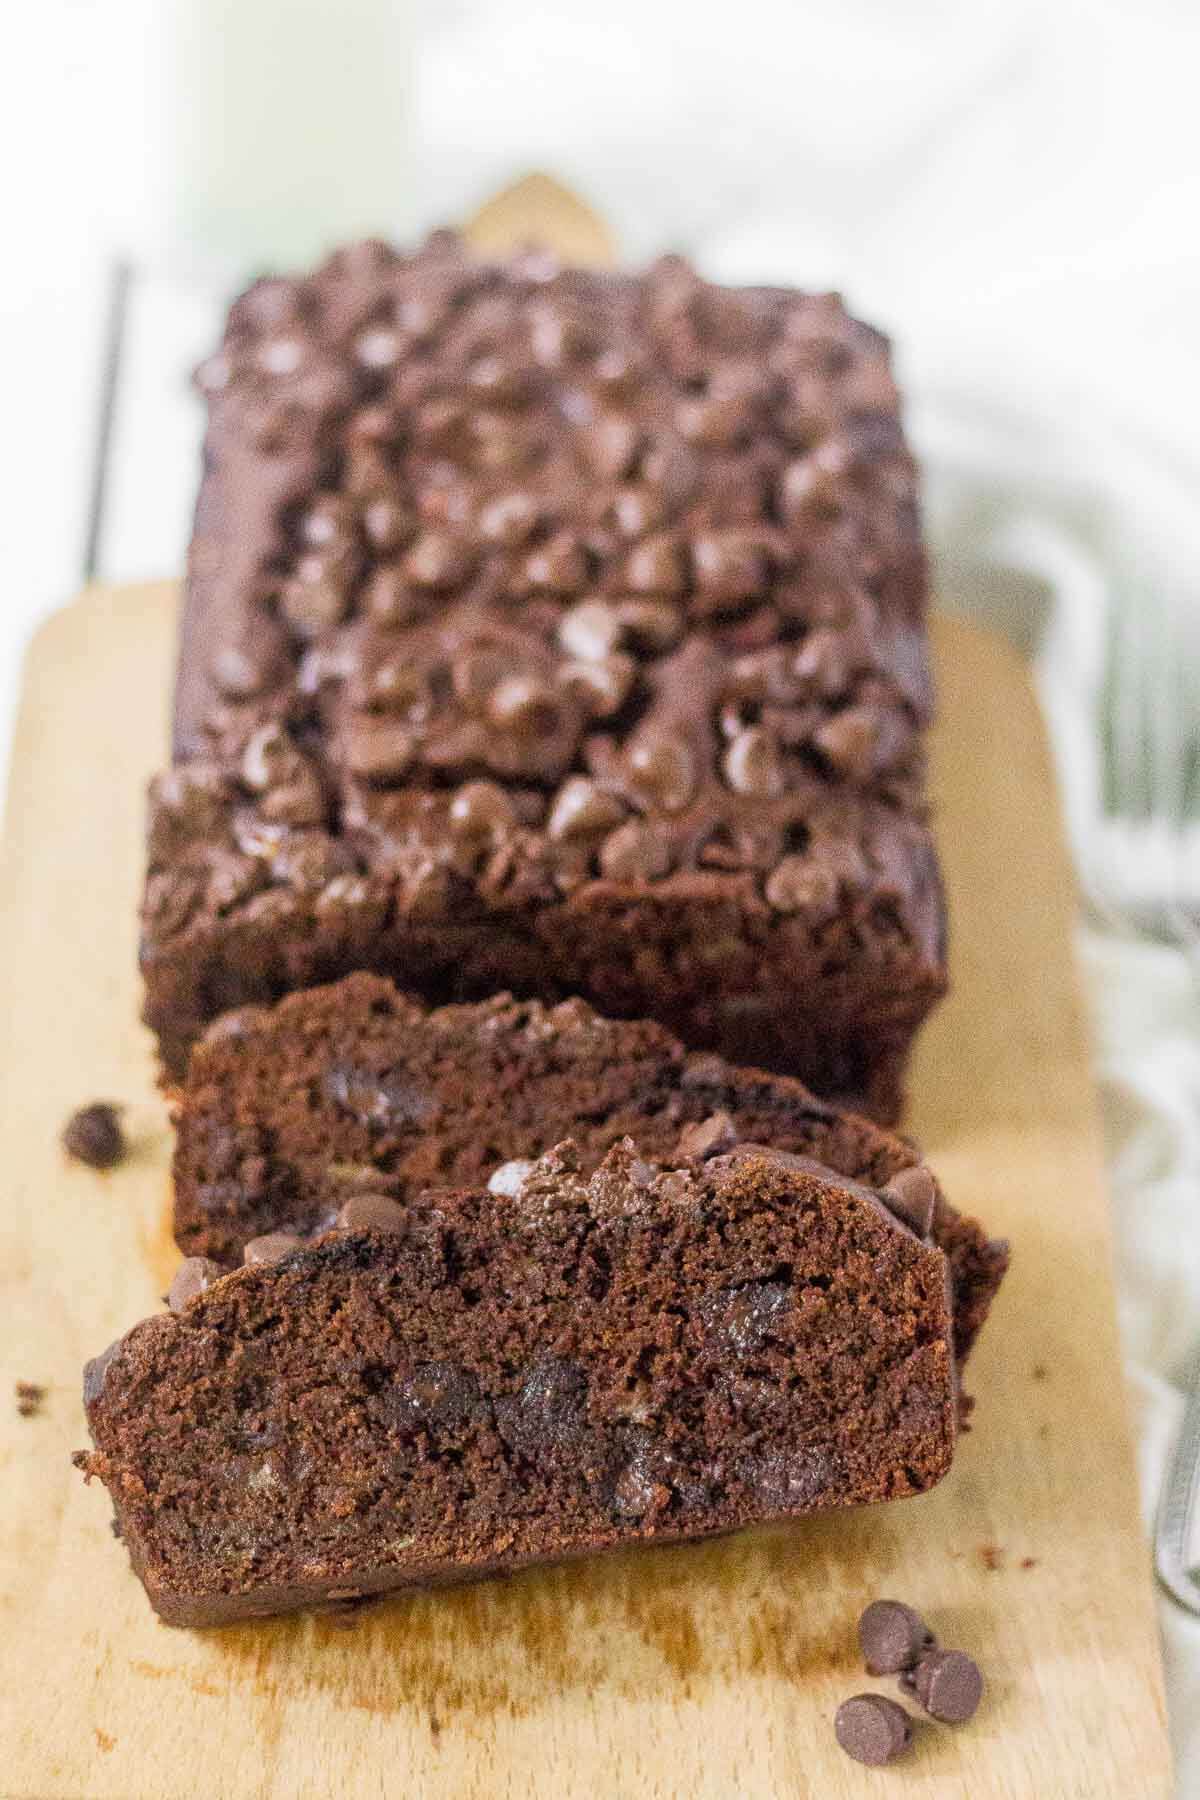 You are going to love this healthy chocolate chip banana bread! It's got deep rich chocolate flavor oozing with melted chocolate chips, sweetness from the banana and it's a good-for-you treat! You can't beat a delicious and healthy dessert (or breakfast).